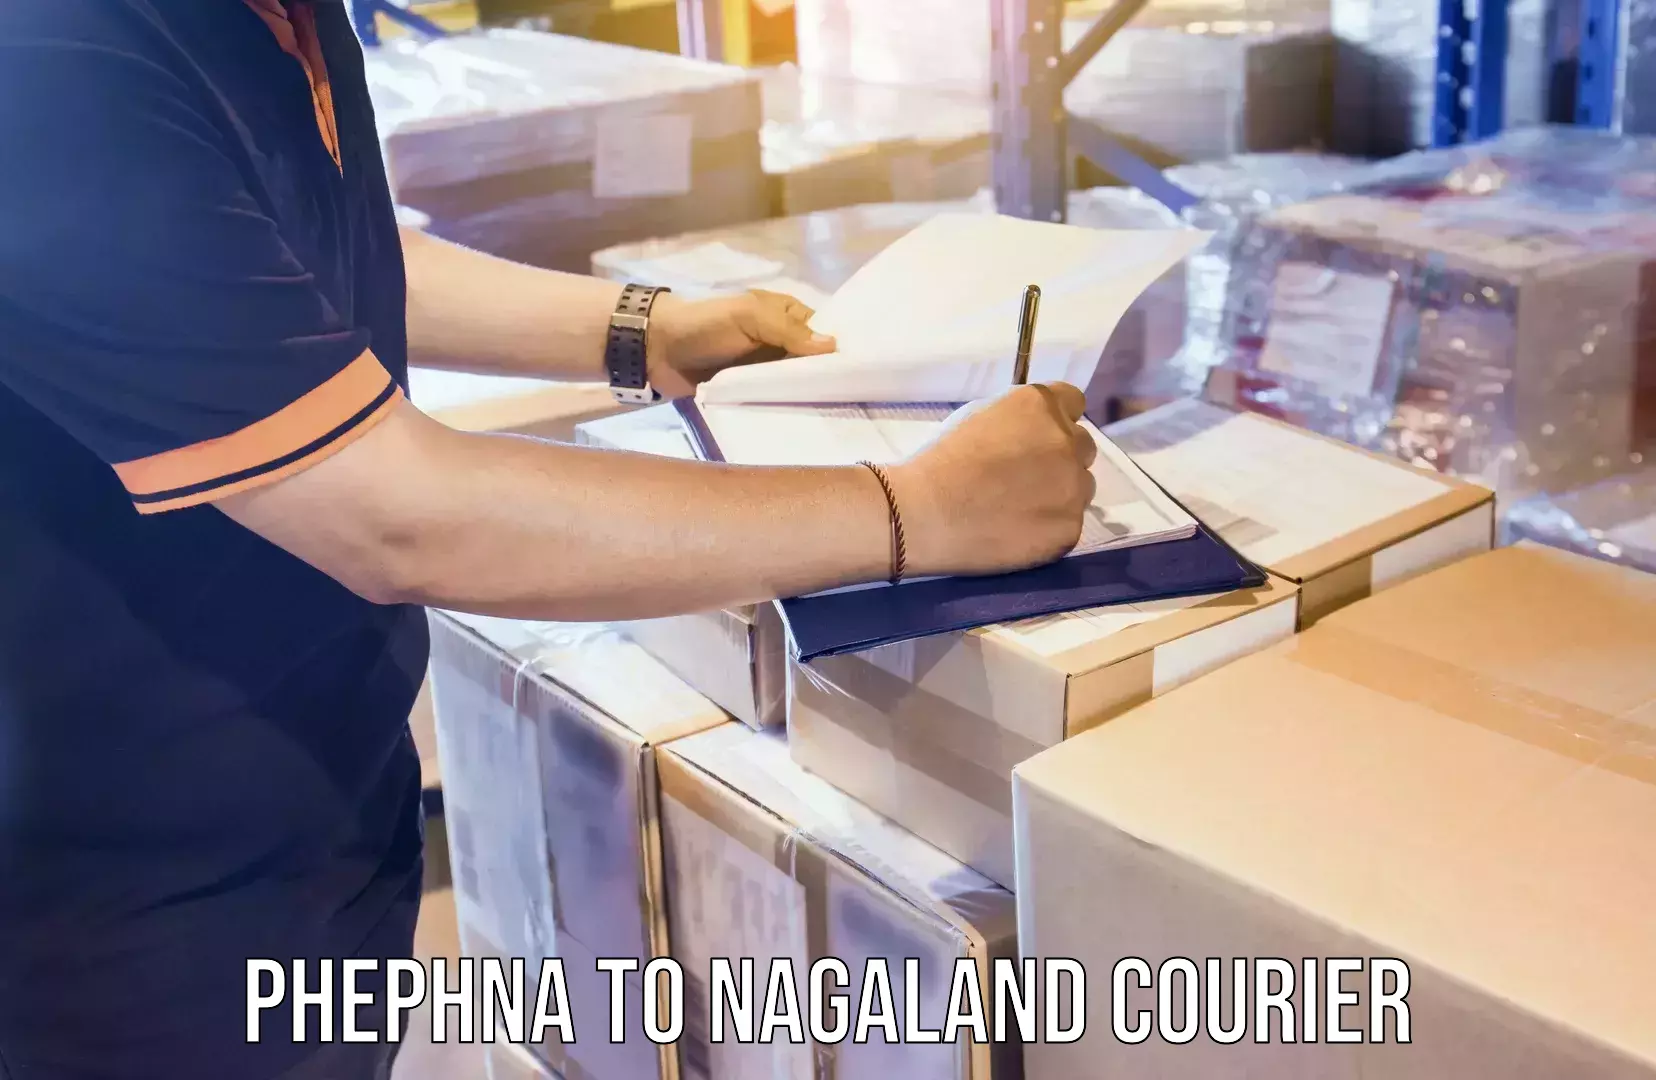 Trusted relocation experts in Phephna to Nagaland